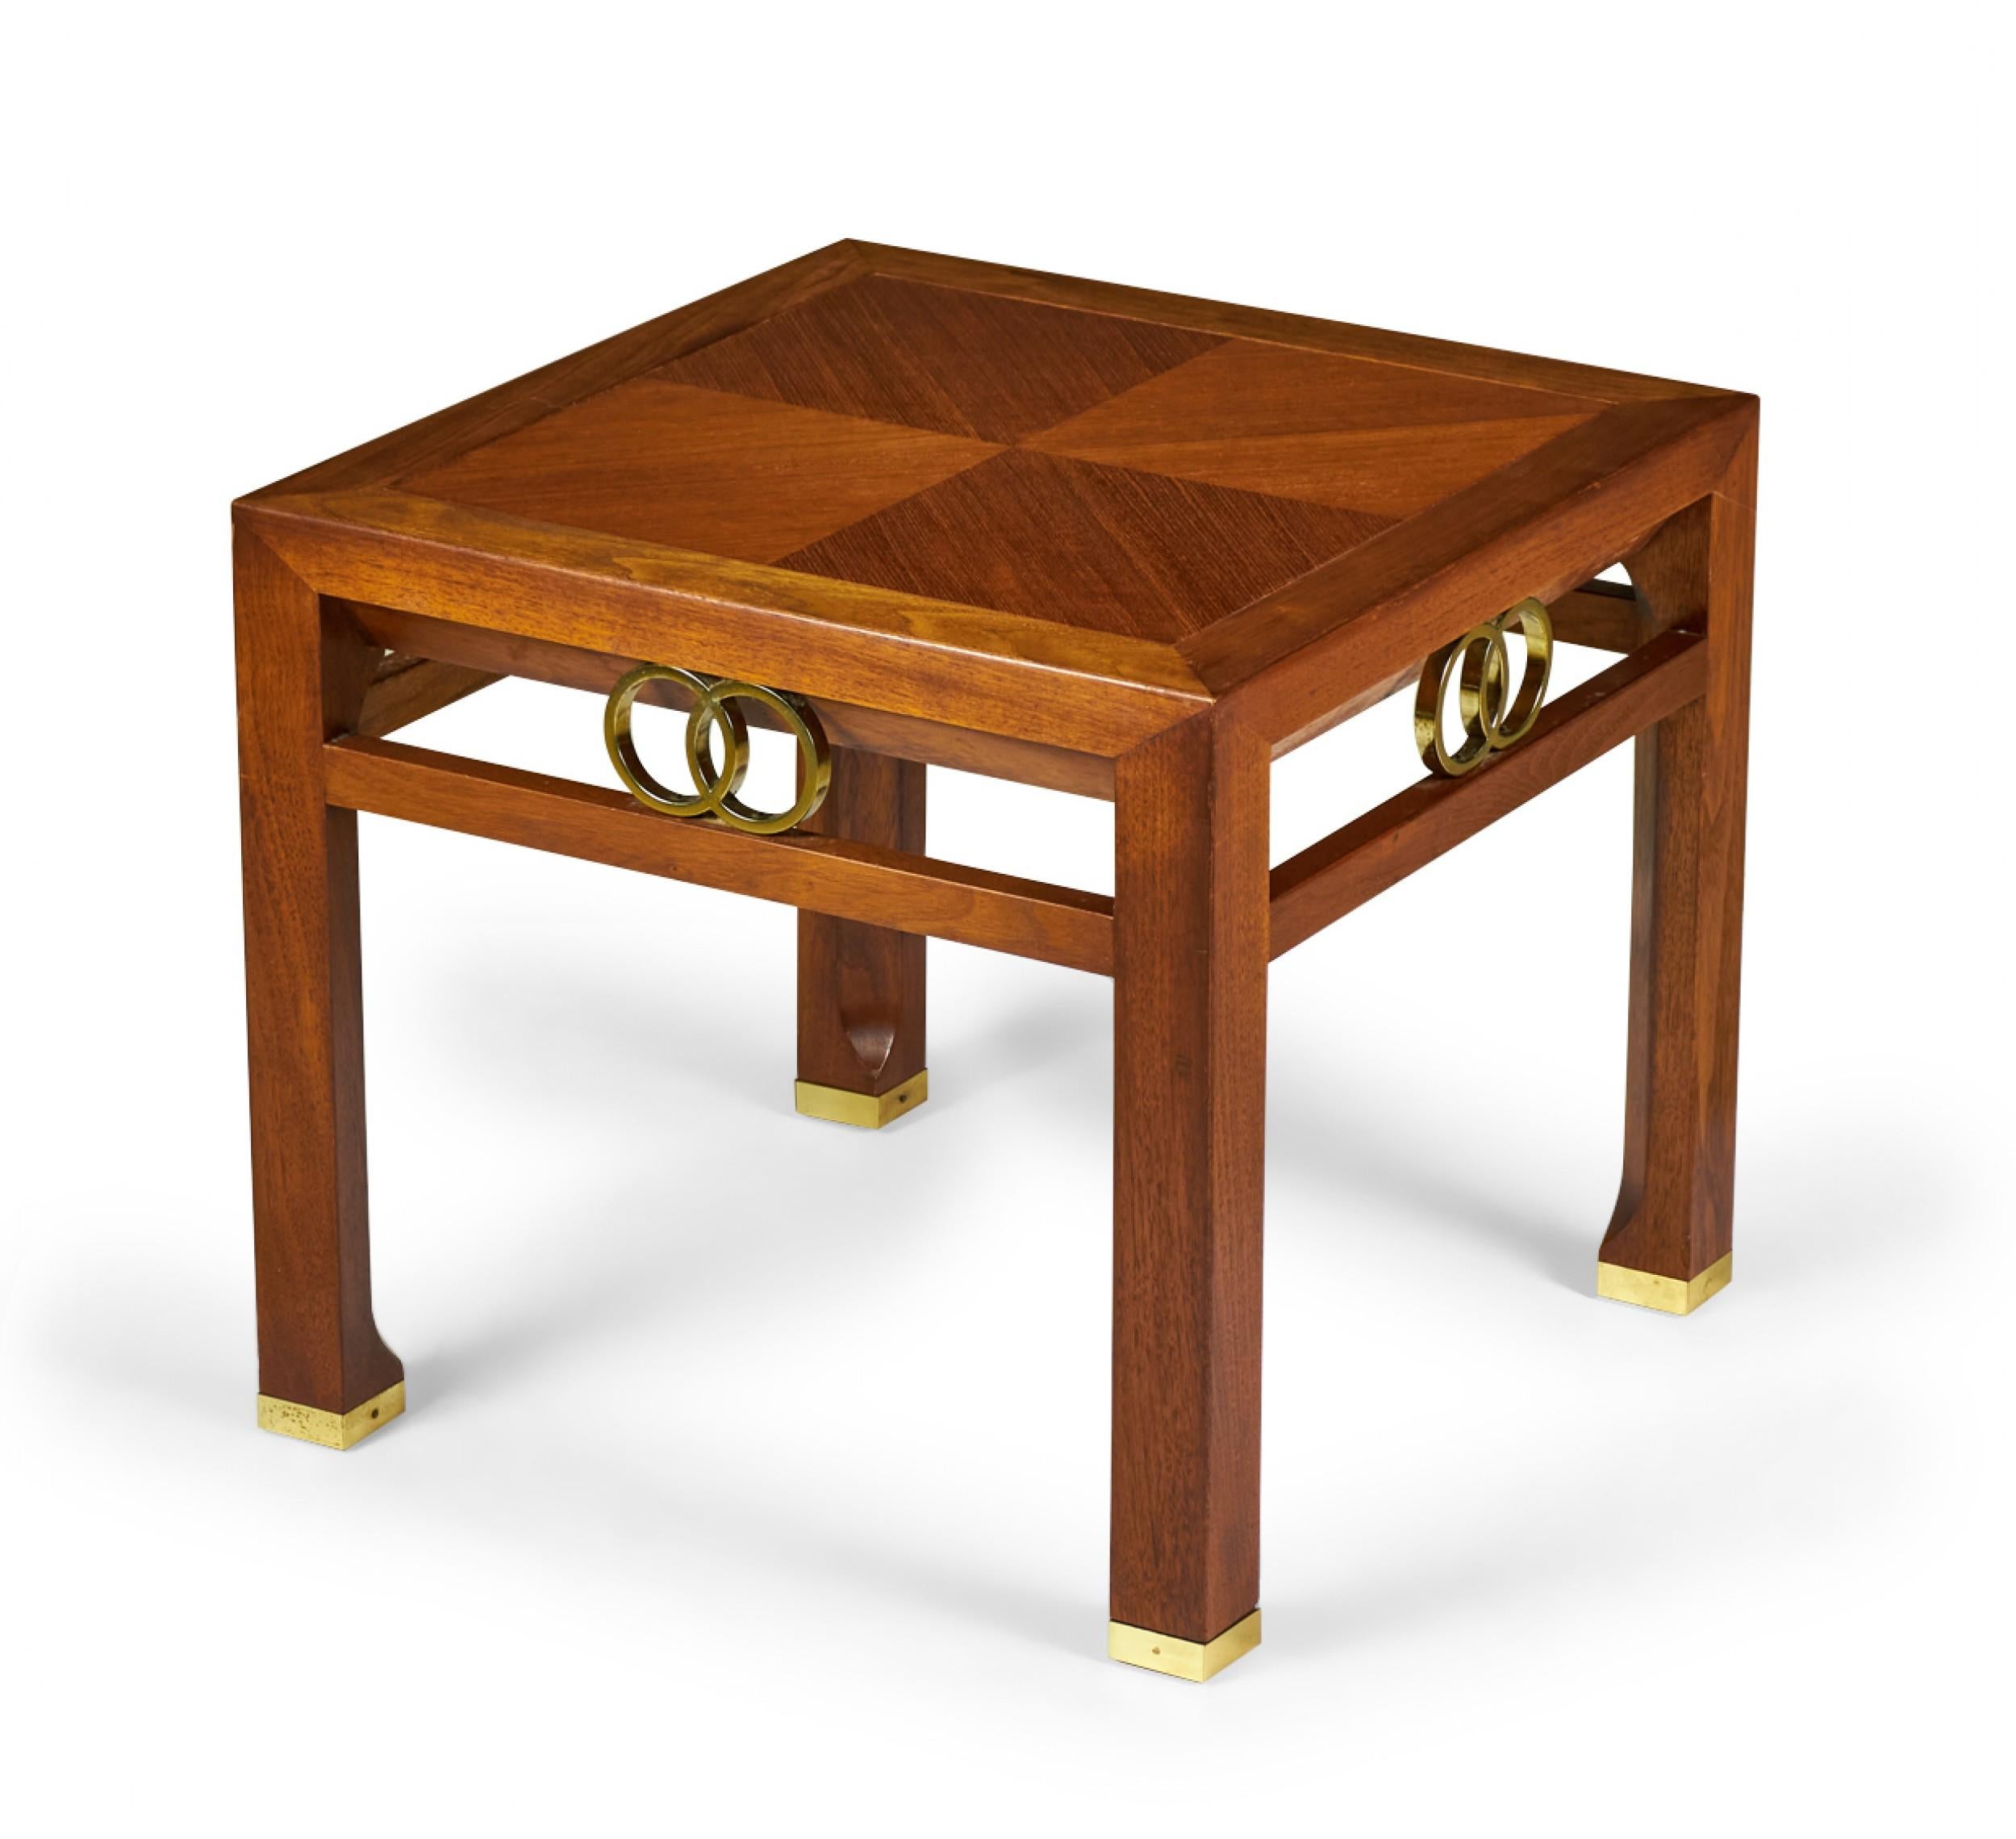 Pair of American mid-century square walnut end table with a four-square veneer top and interlocking brass ring detail between the tabletop and a support rail, resting on four square walnut legs ending in brass sabots. (Michael Taylor for Baker